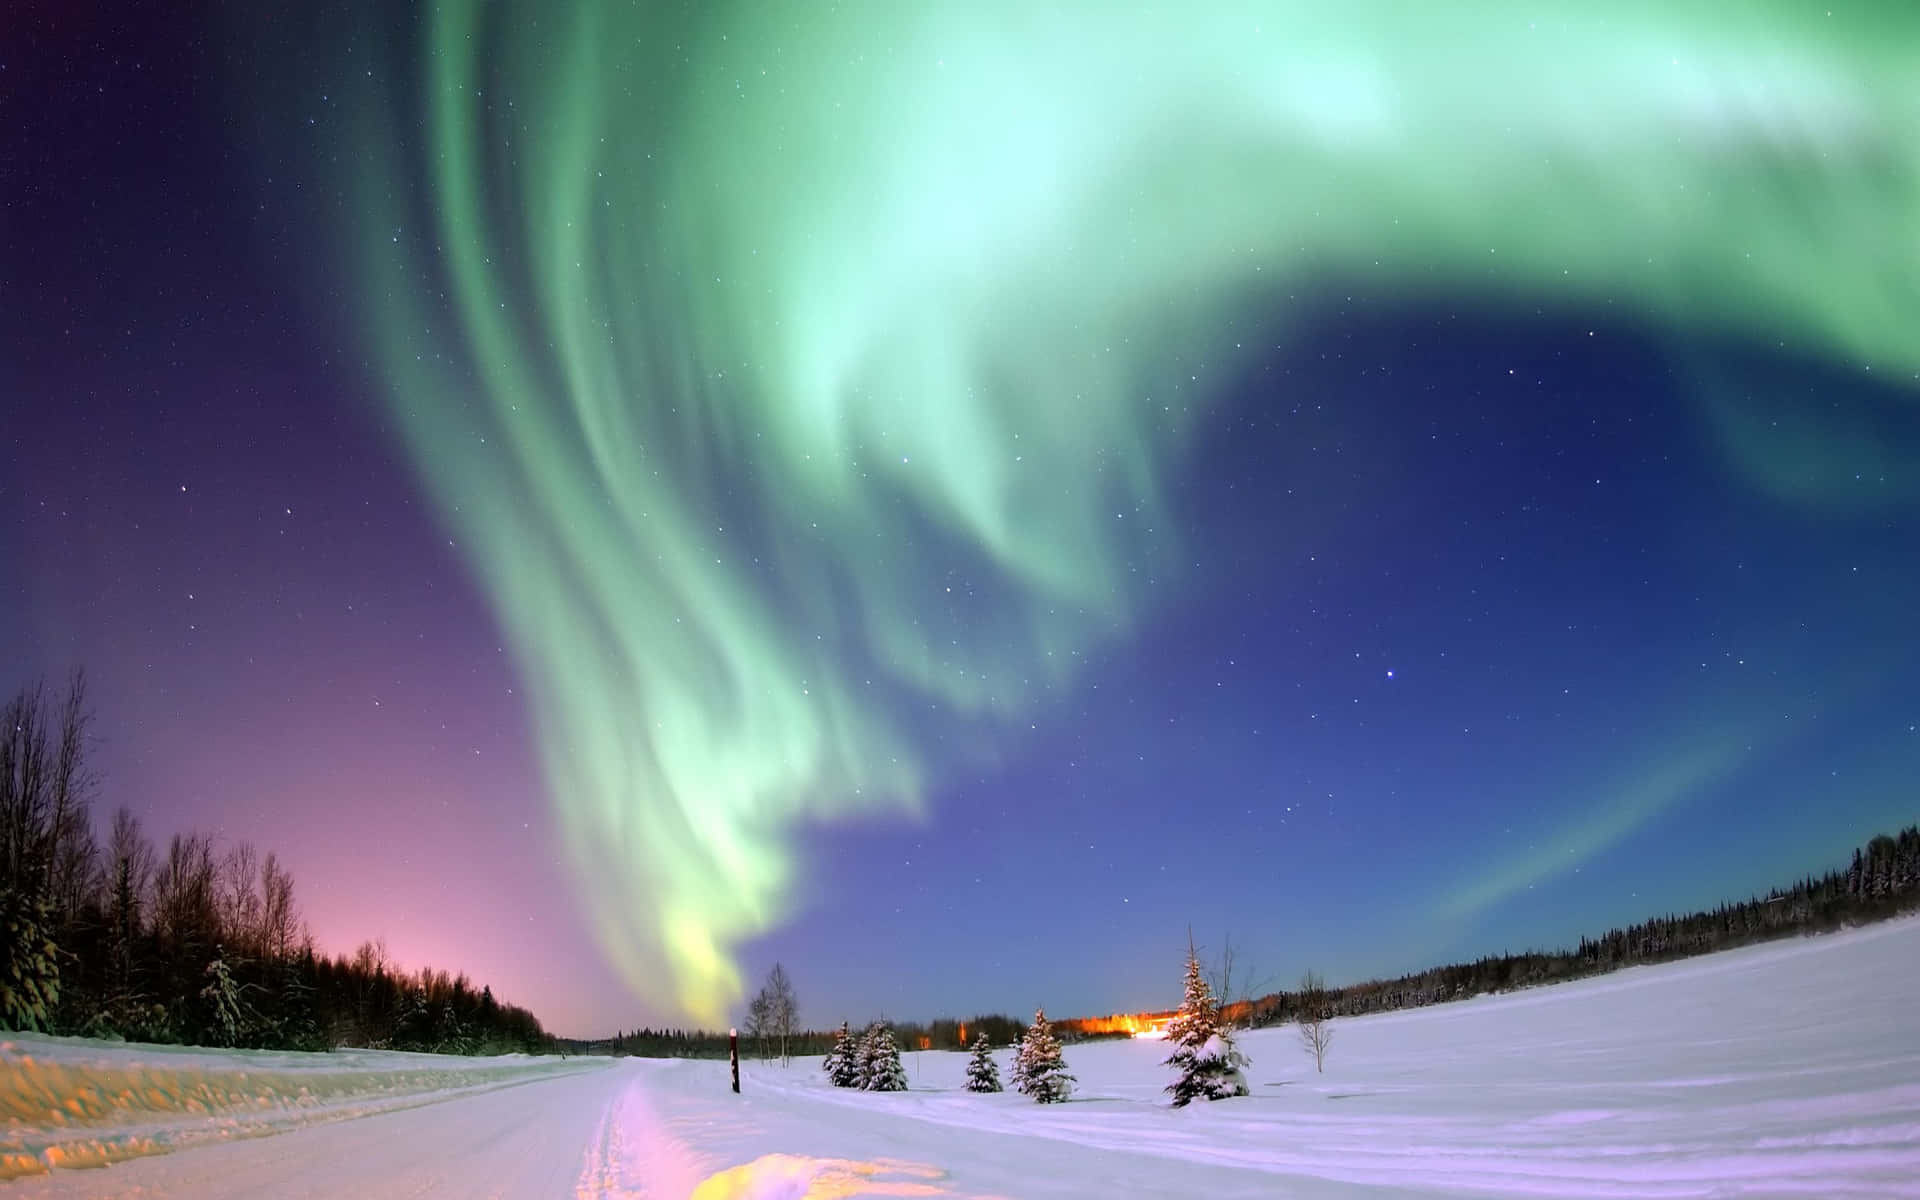 A stunning view of the Aurora Borealis lighting up the night sky.